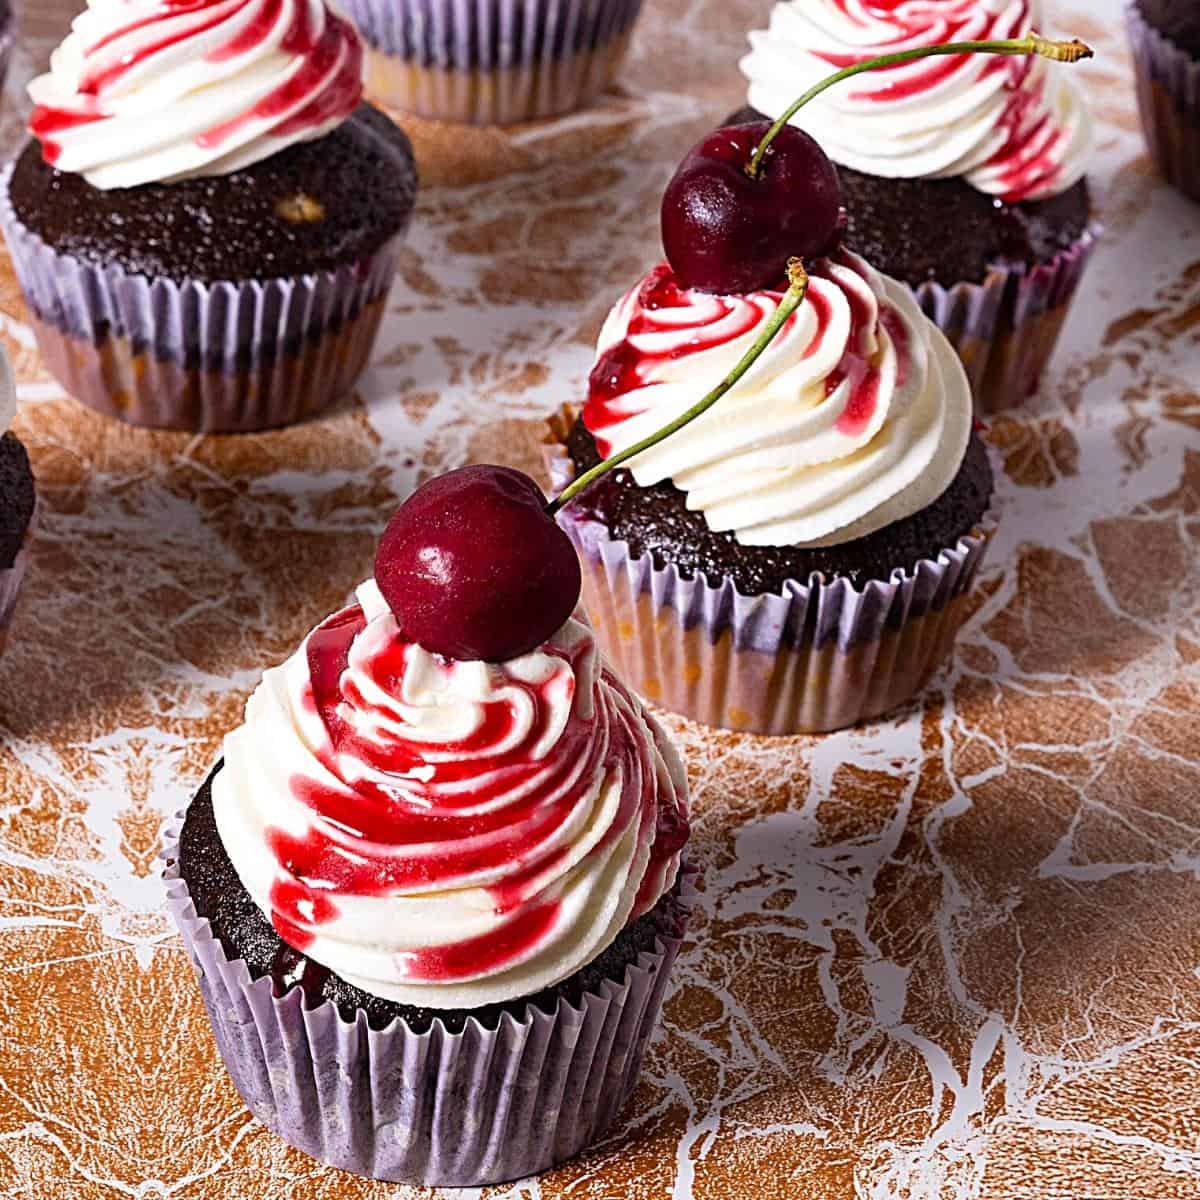 Frosted cupcake with cherry filling.